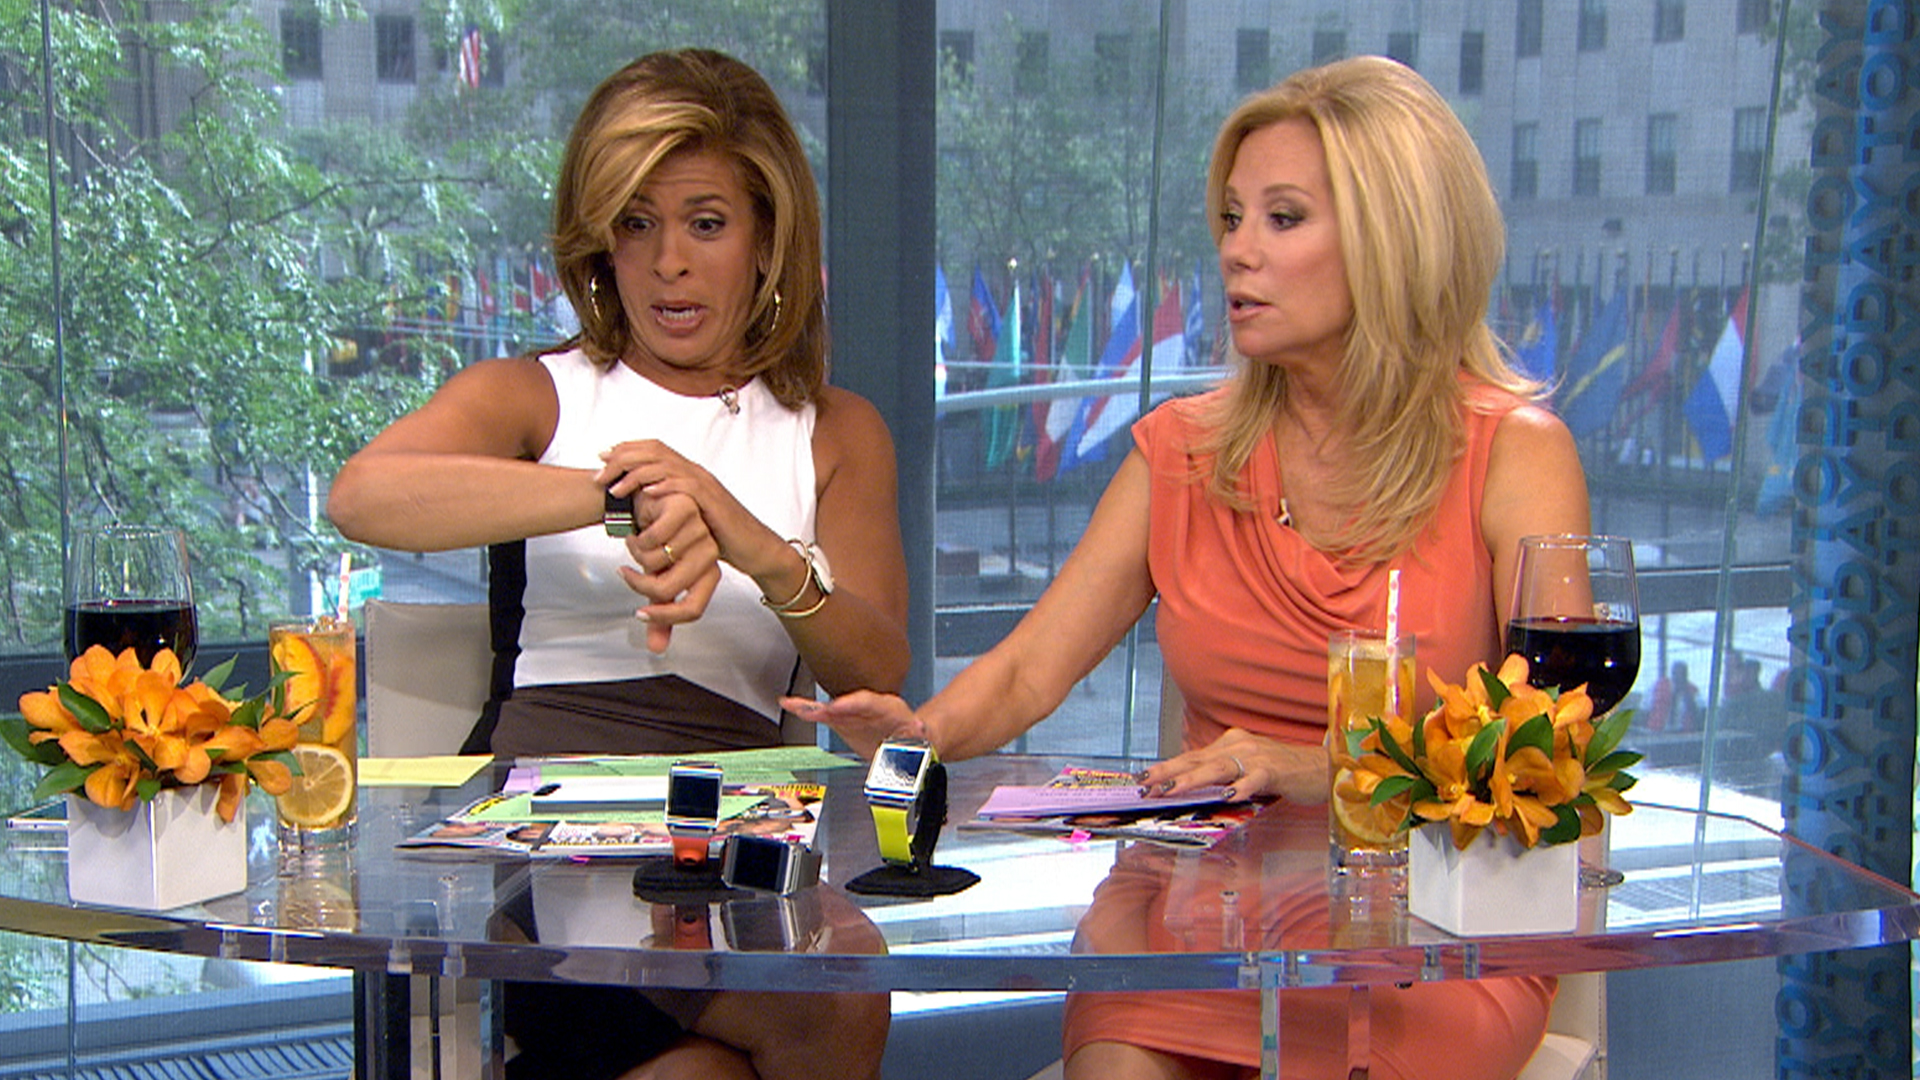 Lee Gifford and Hoda Kotb showed off the capabilities of the new Samsung wa...